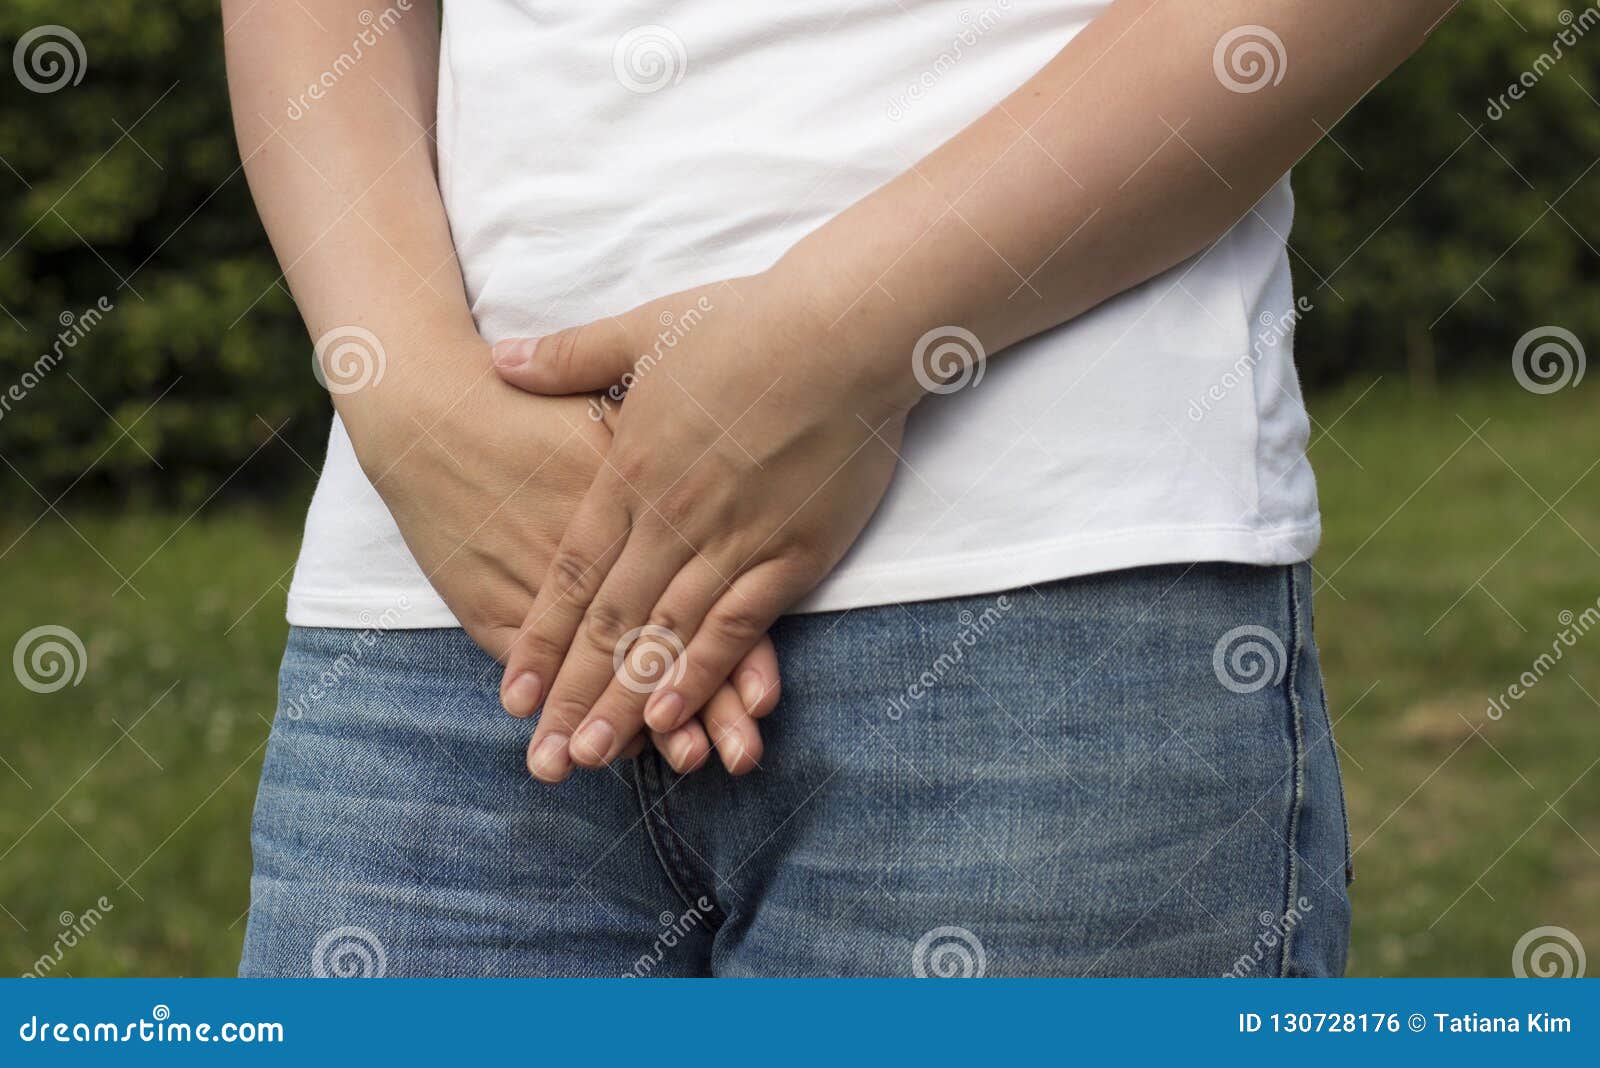 186 Women Holding Crotch Stock Photos - Free & Royalty-Free Stock Photos  from Dreamstime